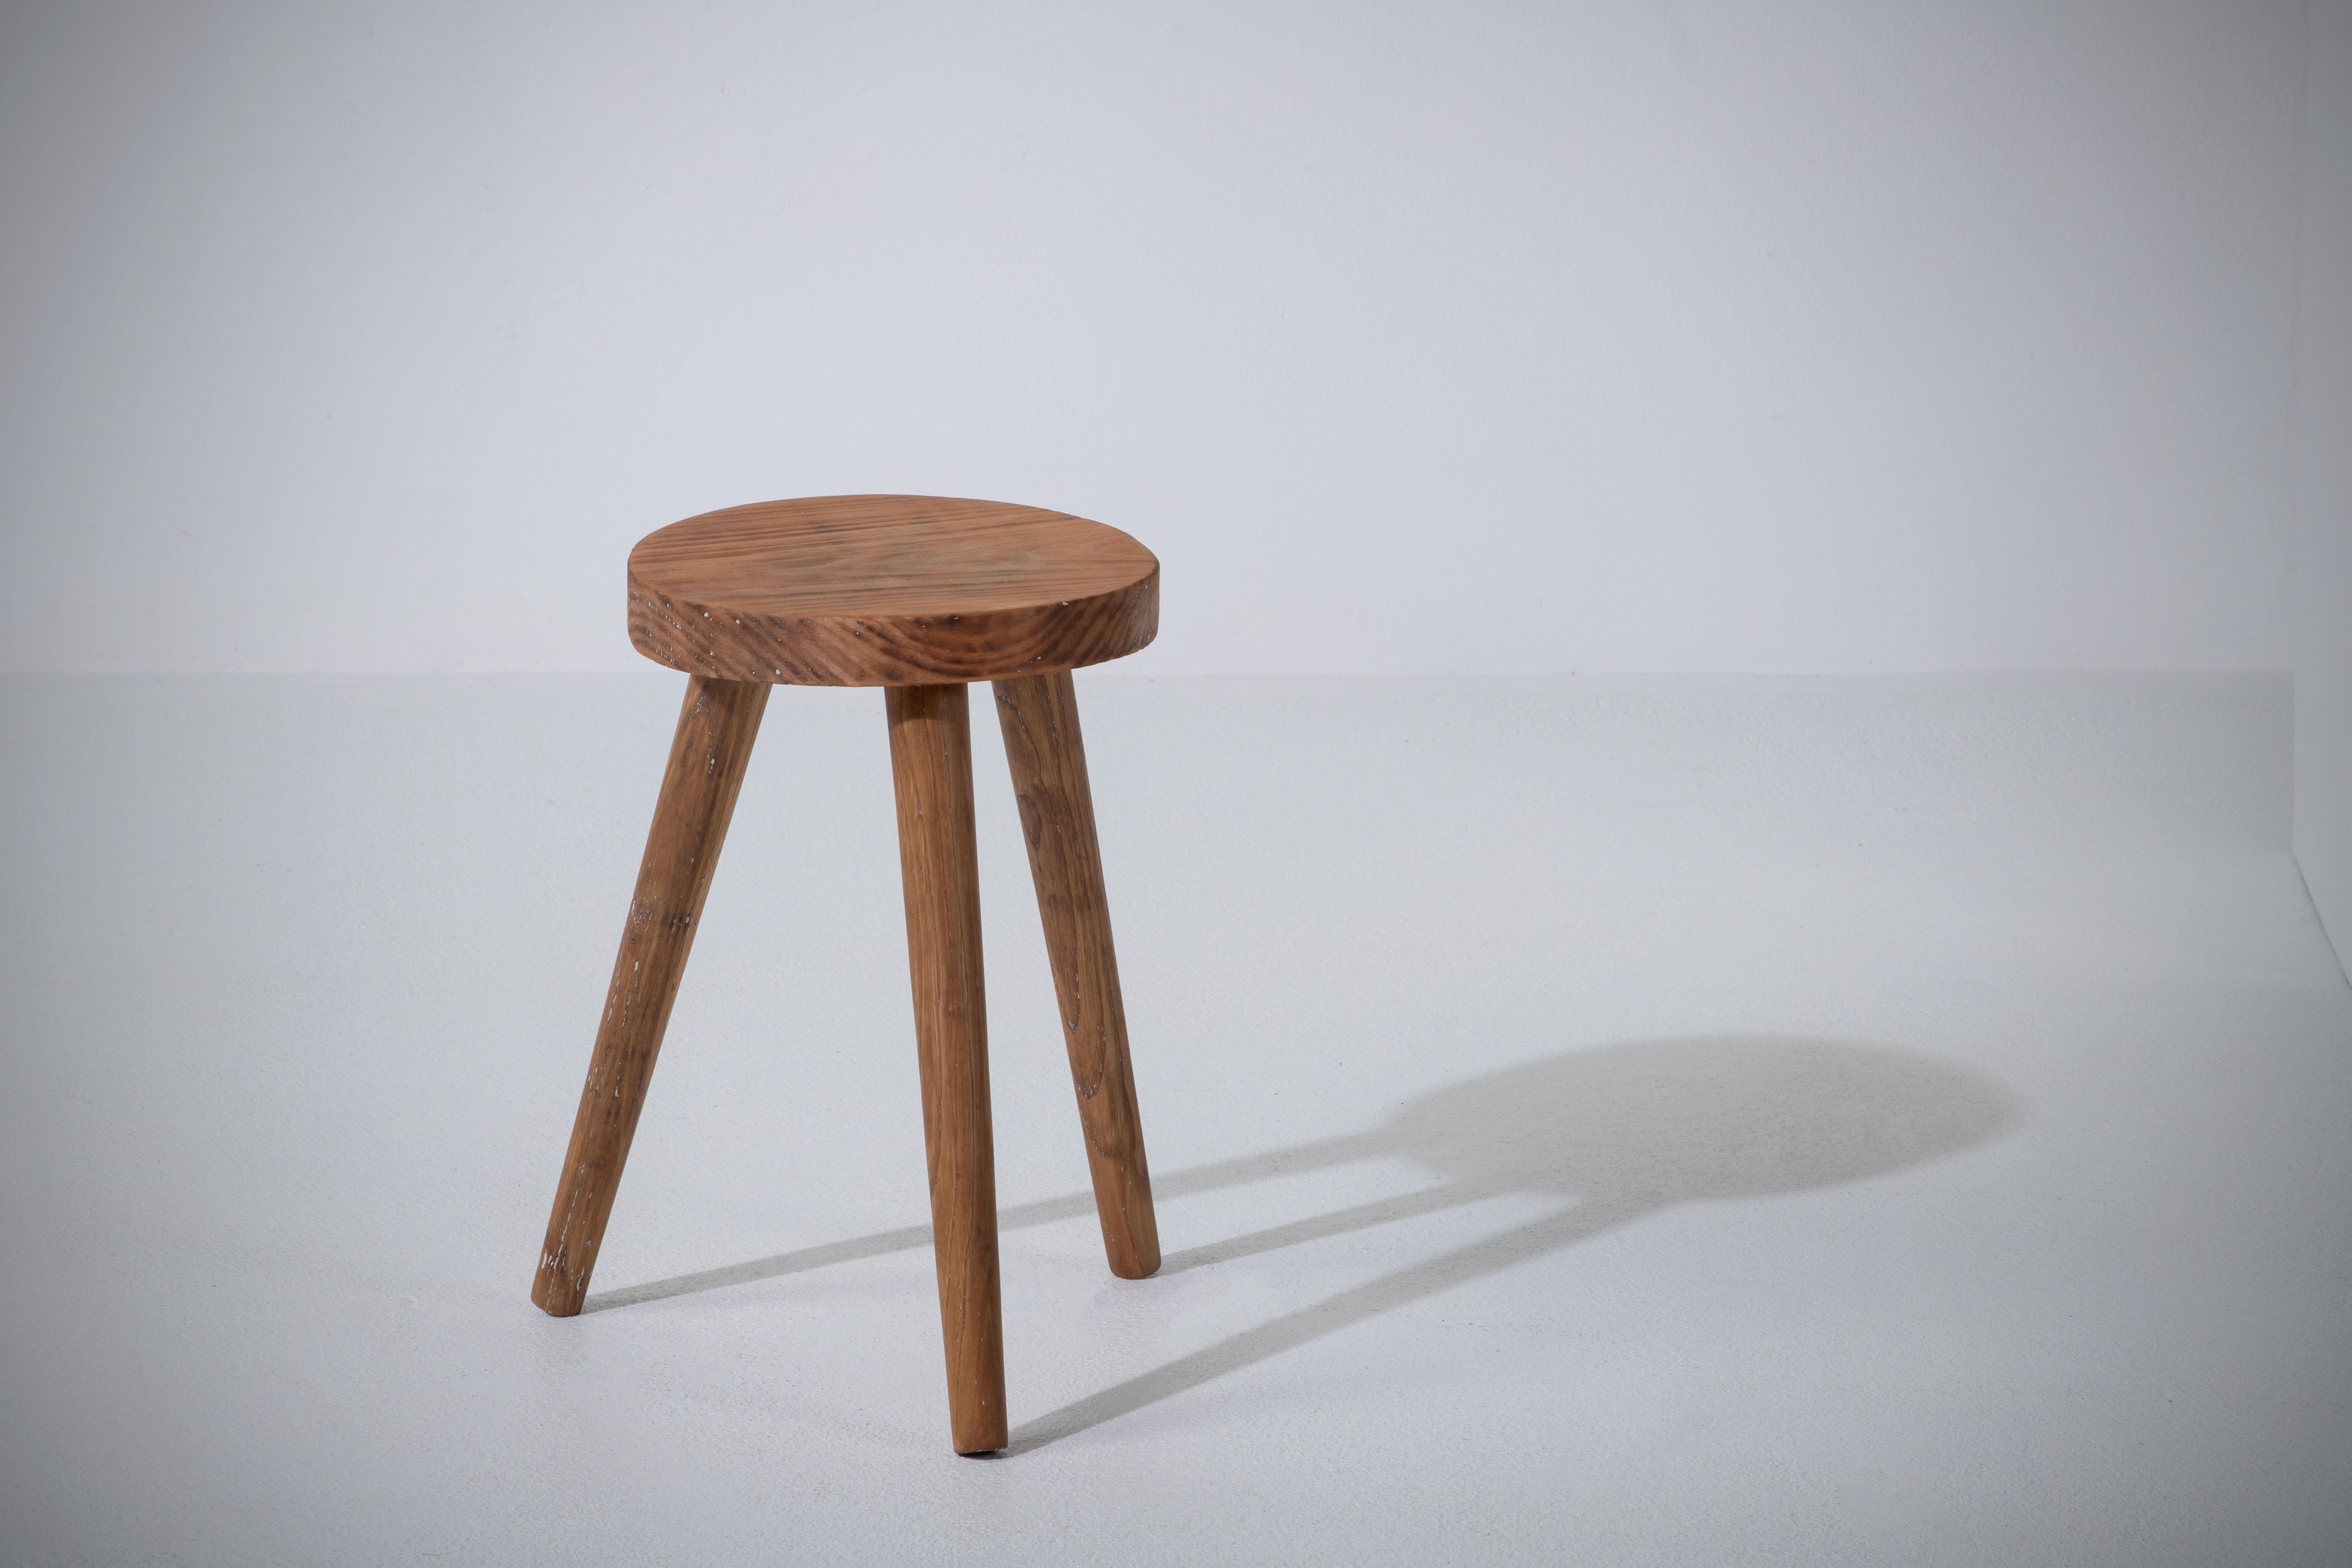 Fantastic wood stool from France. Made in the 1960s, no hardware. Lovely Vintage look.
Good vintage condition.